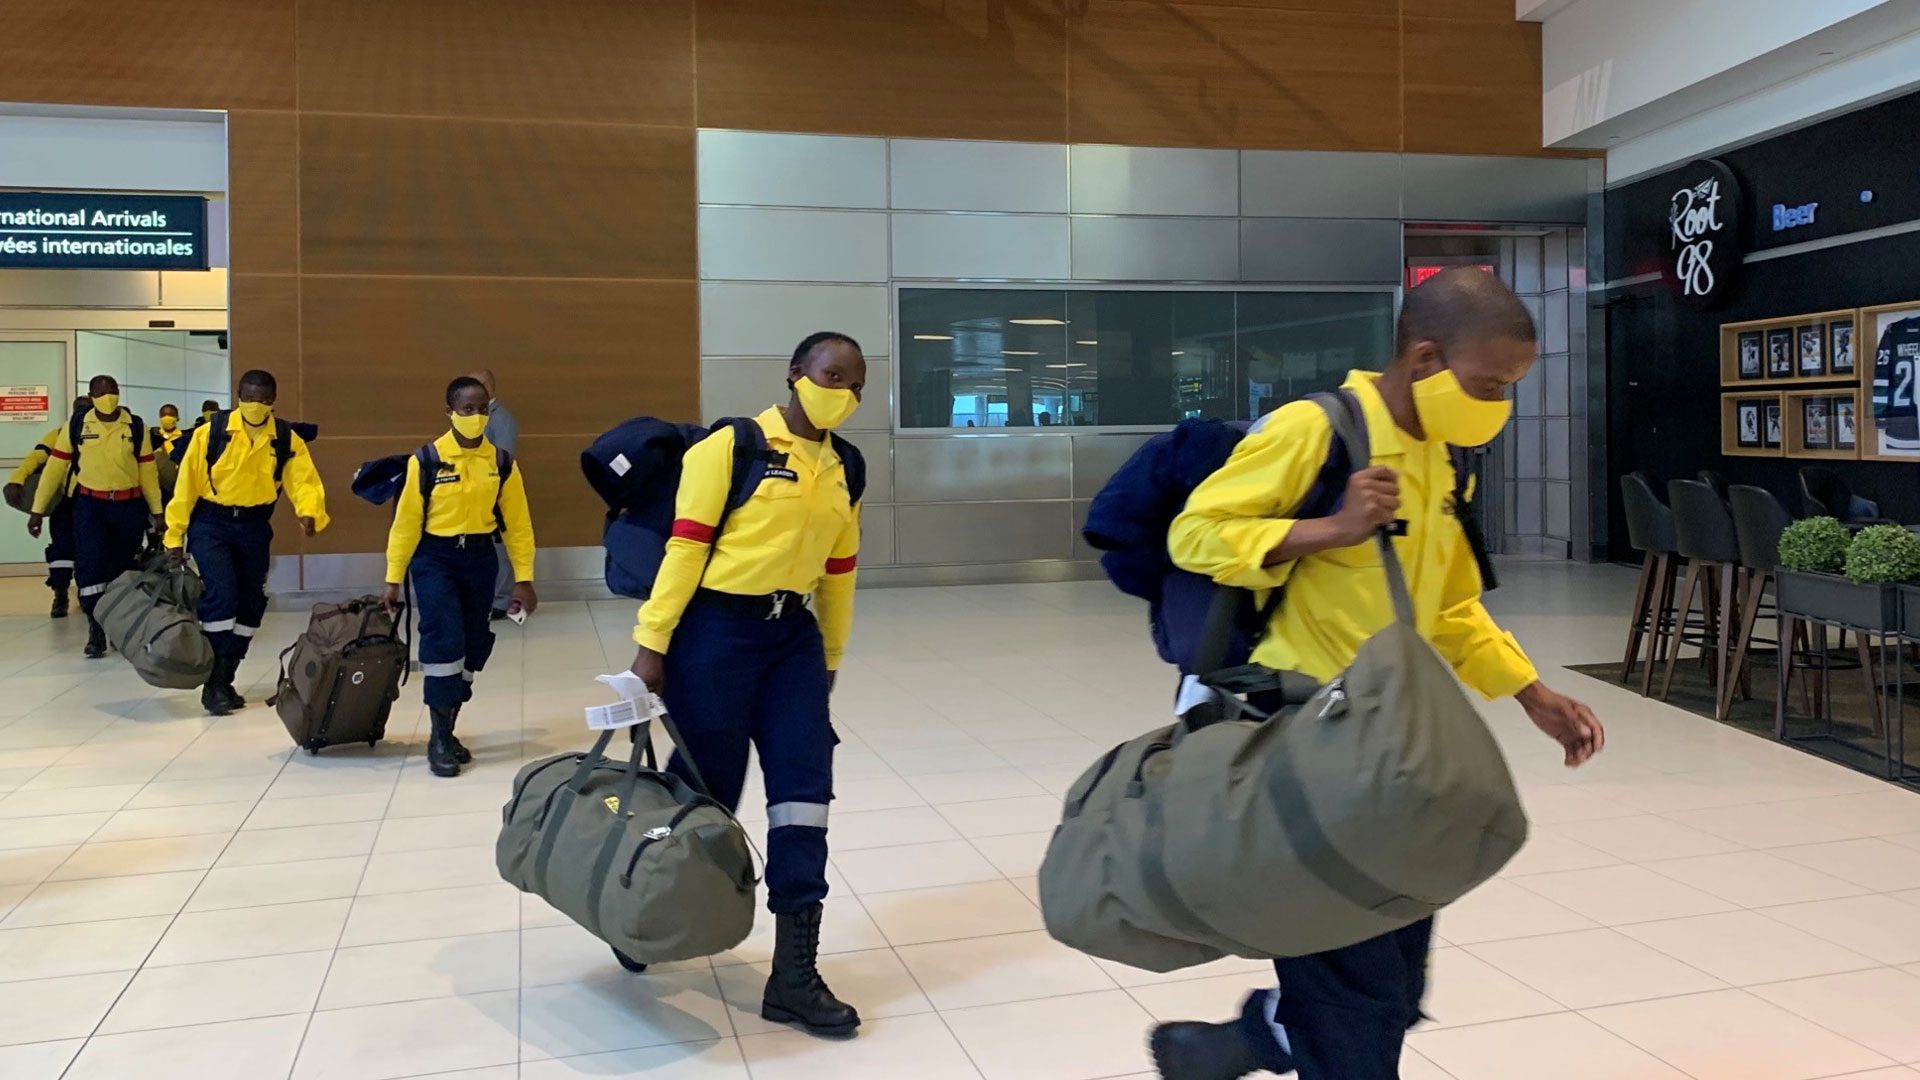 Firefighters from South Africa